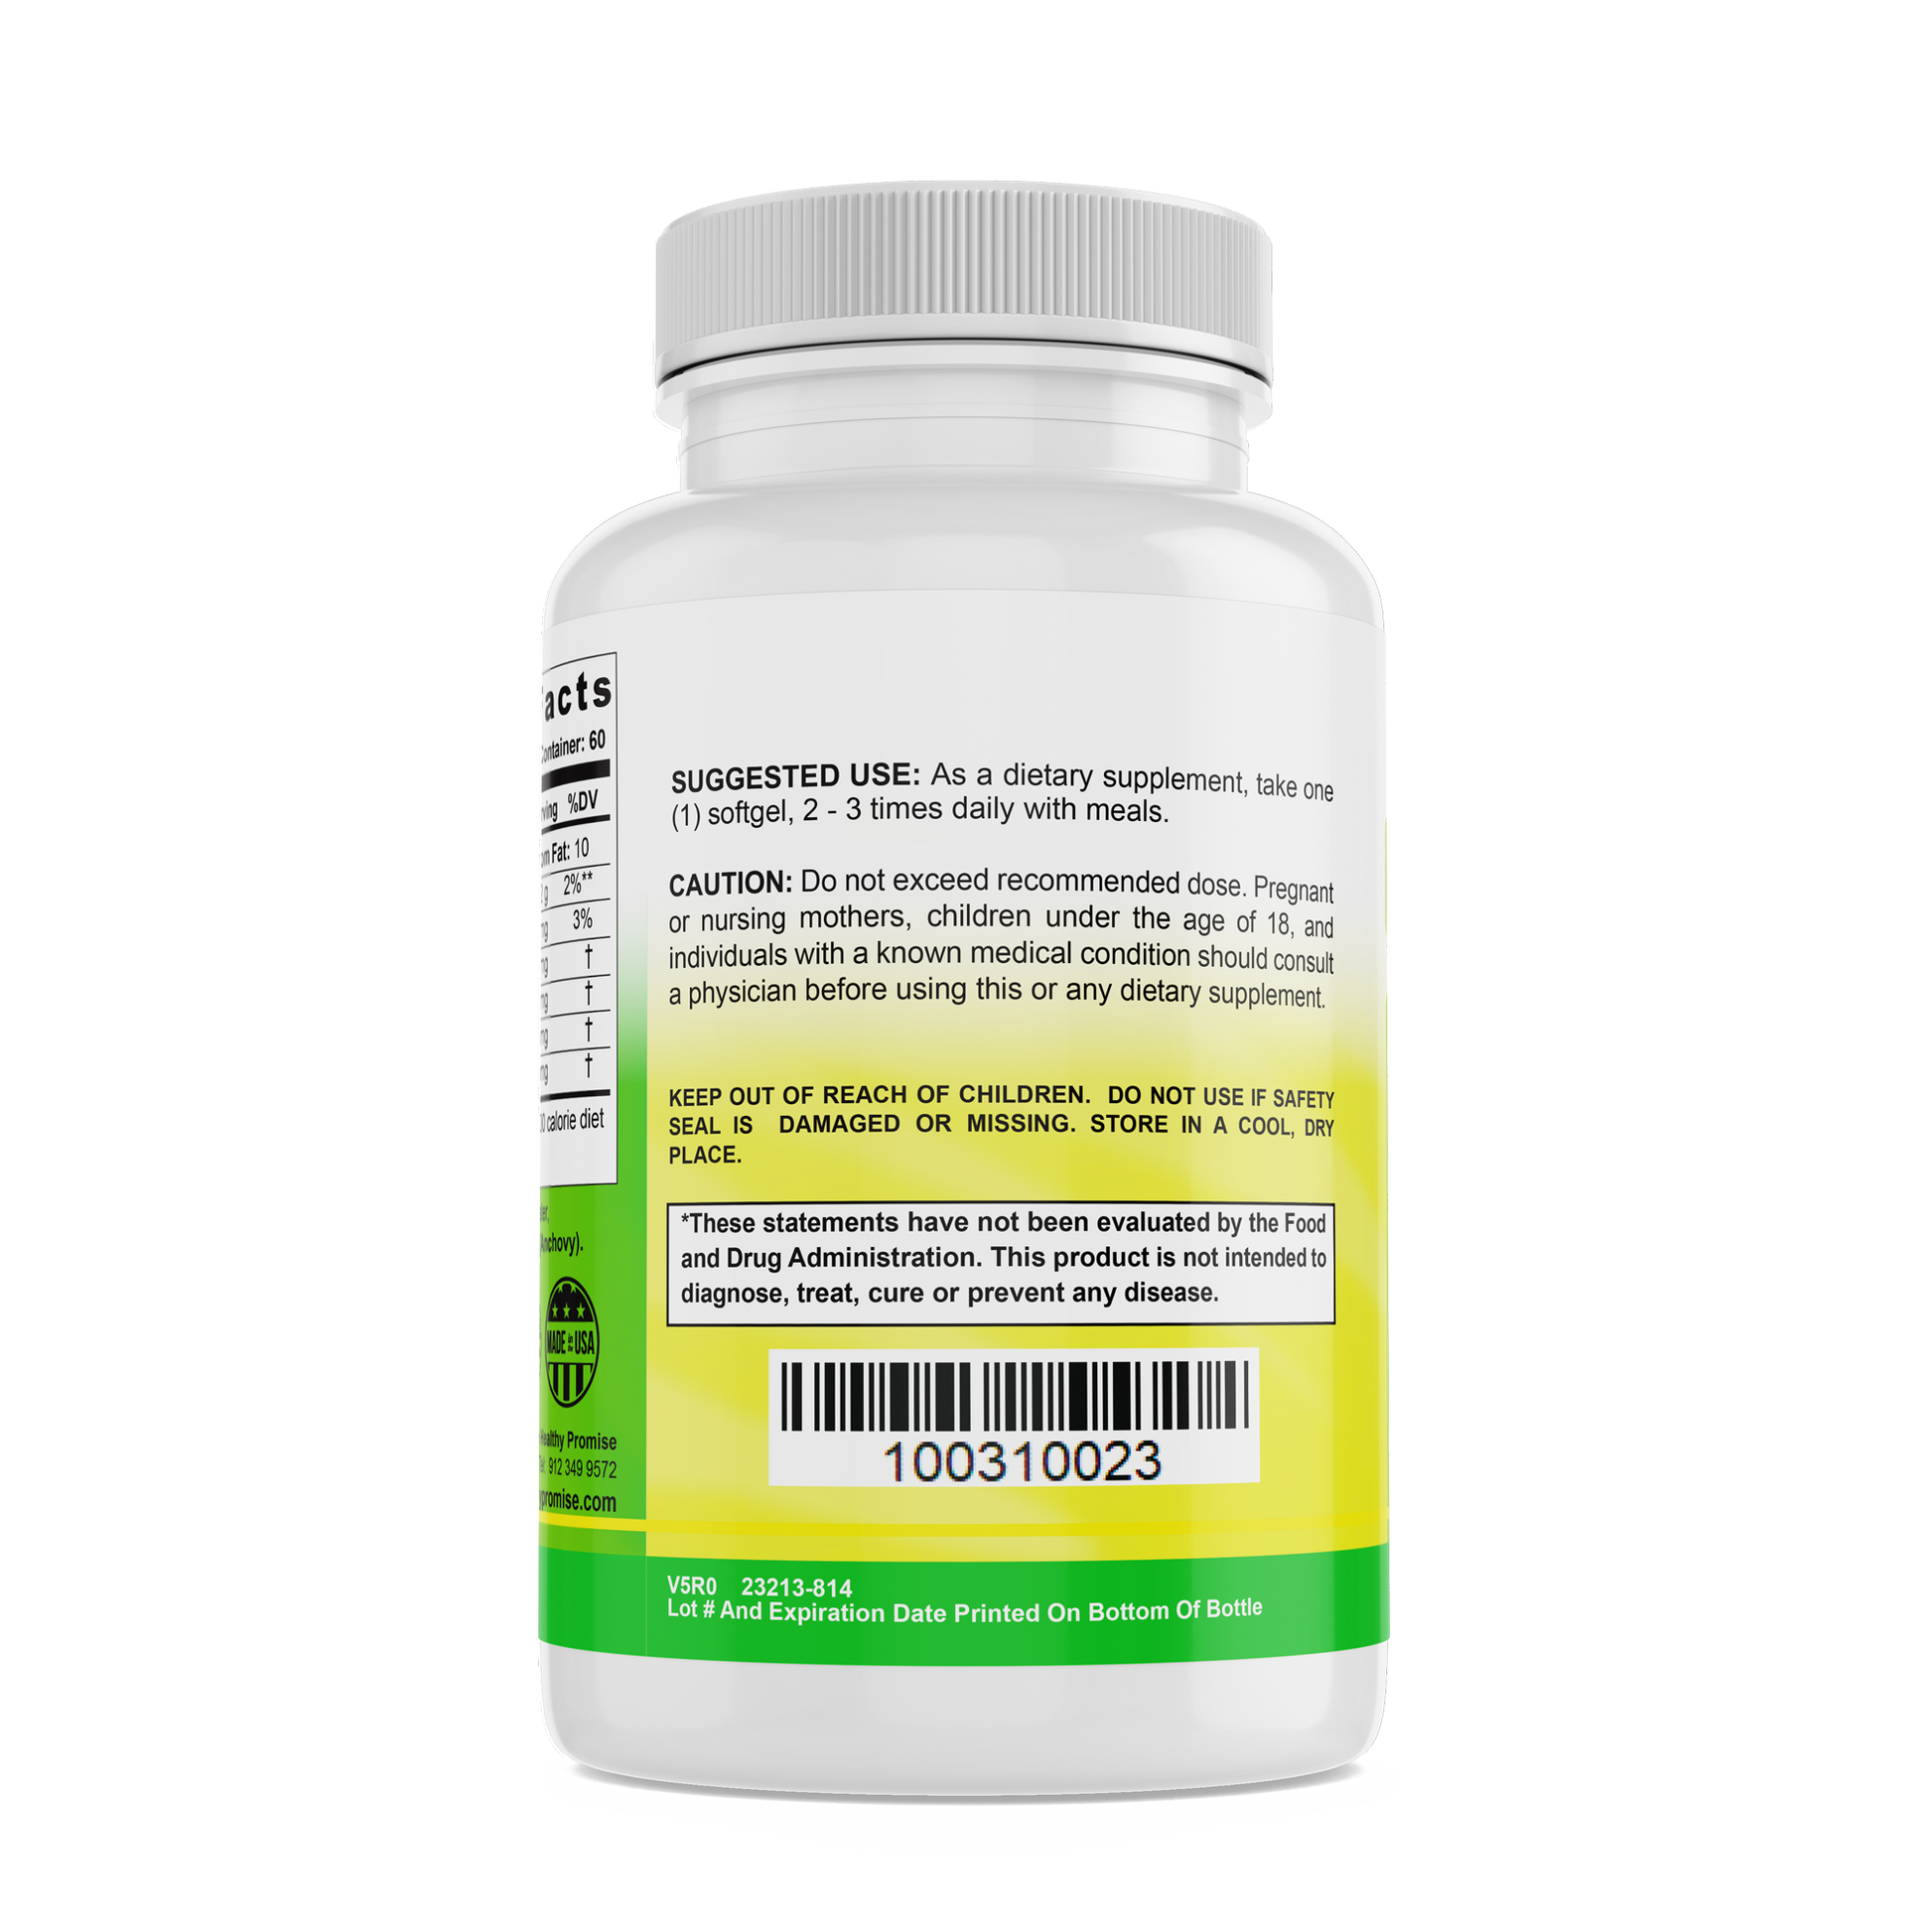 the healthy promise omega 3 fish oil dietary supplement bottle suggested use